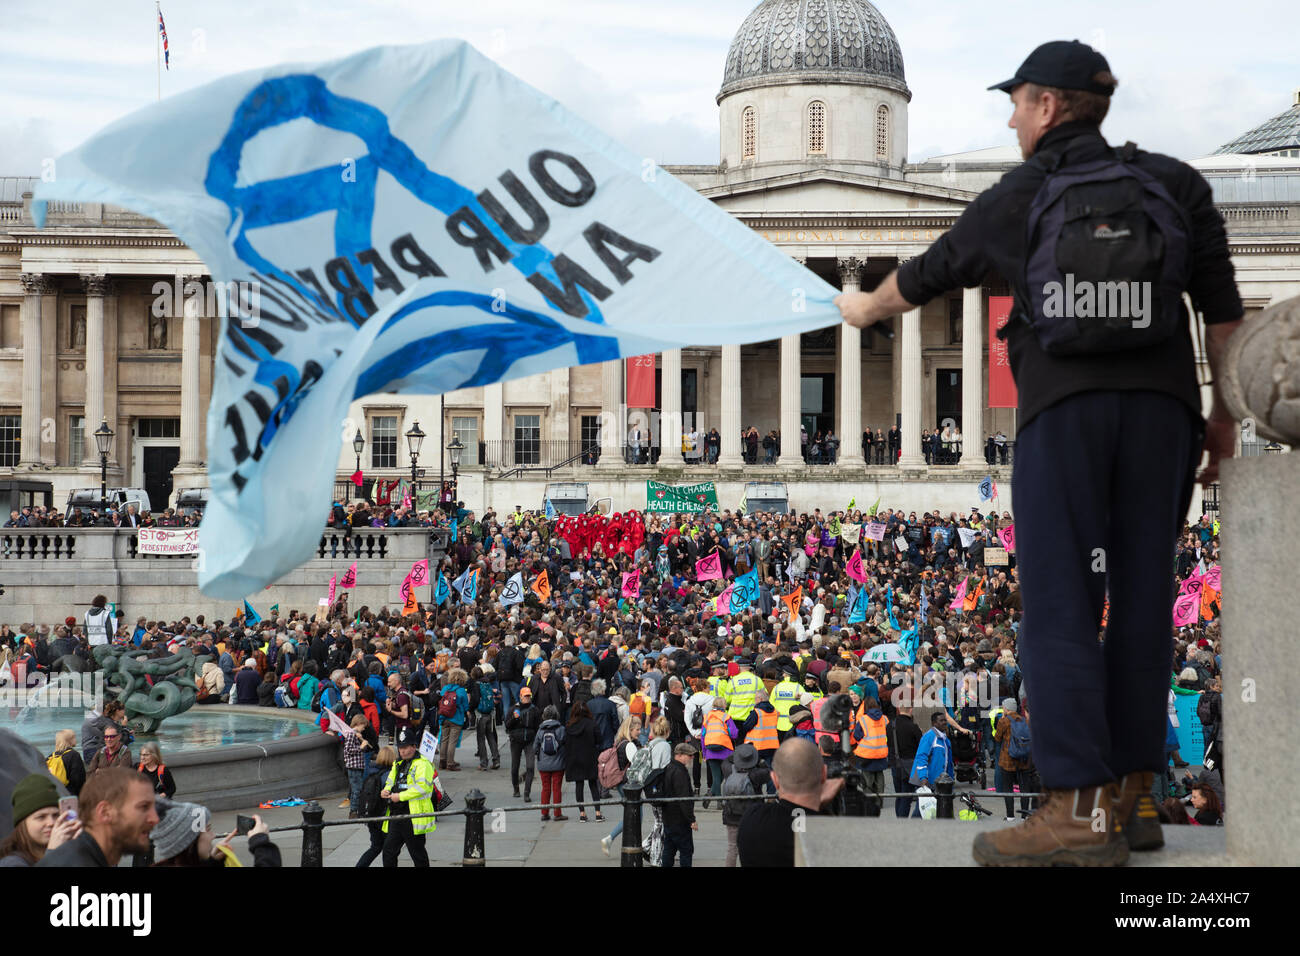 London, UK. 16th October 2019. General overview of Extinction Rebellion protesters seen on Trafalgar Square in defiance of the Section 14 of the Public Order Act 1986, issued by the police, to cease any protests within London by the climate action group. Credit: Joe Kuis / Alamy News Stock Photo